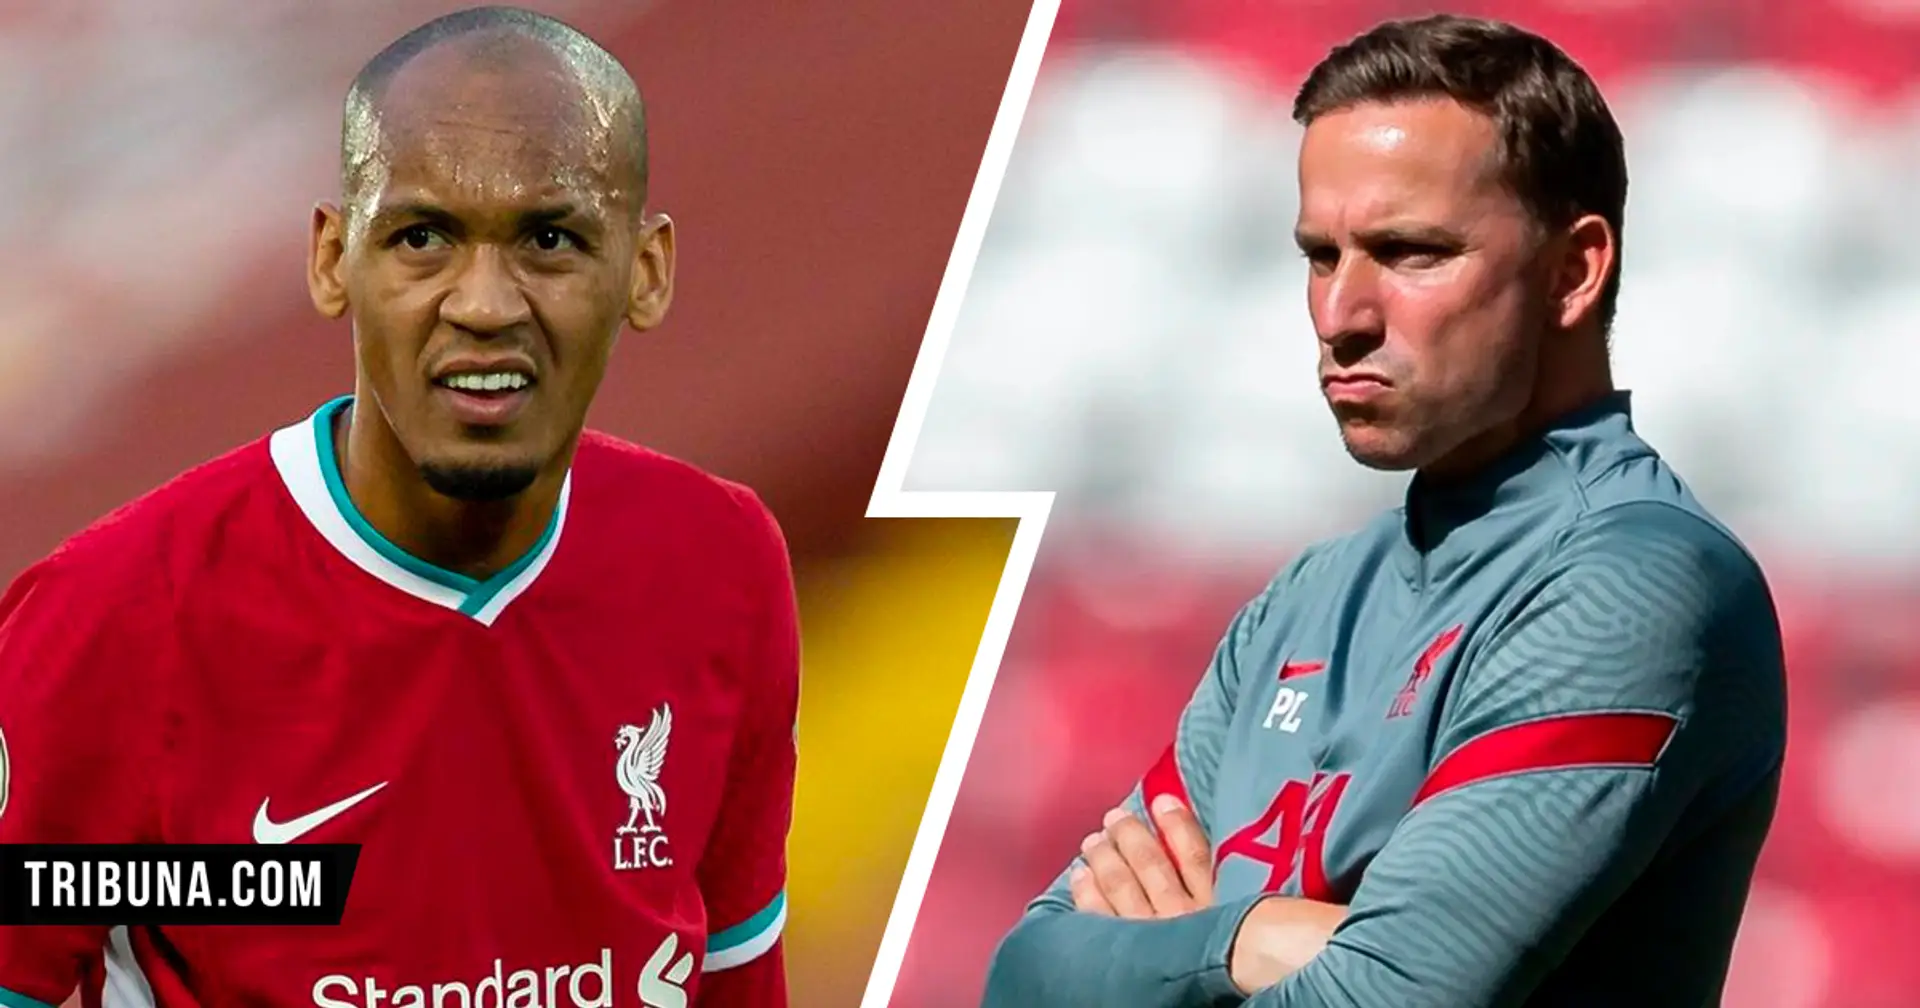 Pep Lijnders opens up on Fabi's centre-back sacrifice: 'It shows his character - he's always ready to help team'